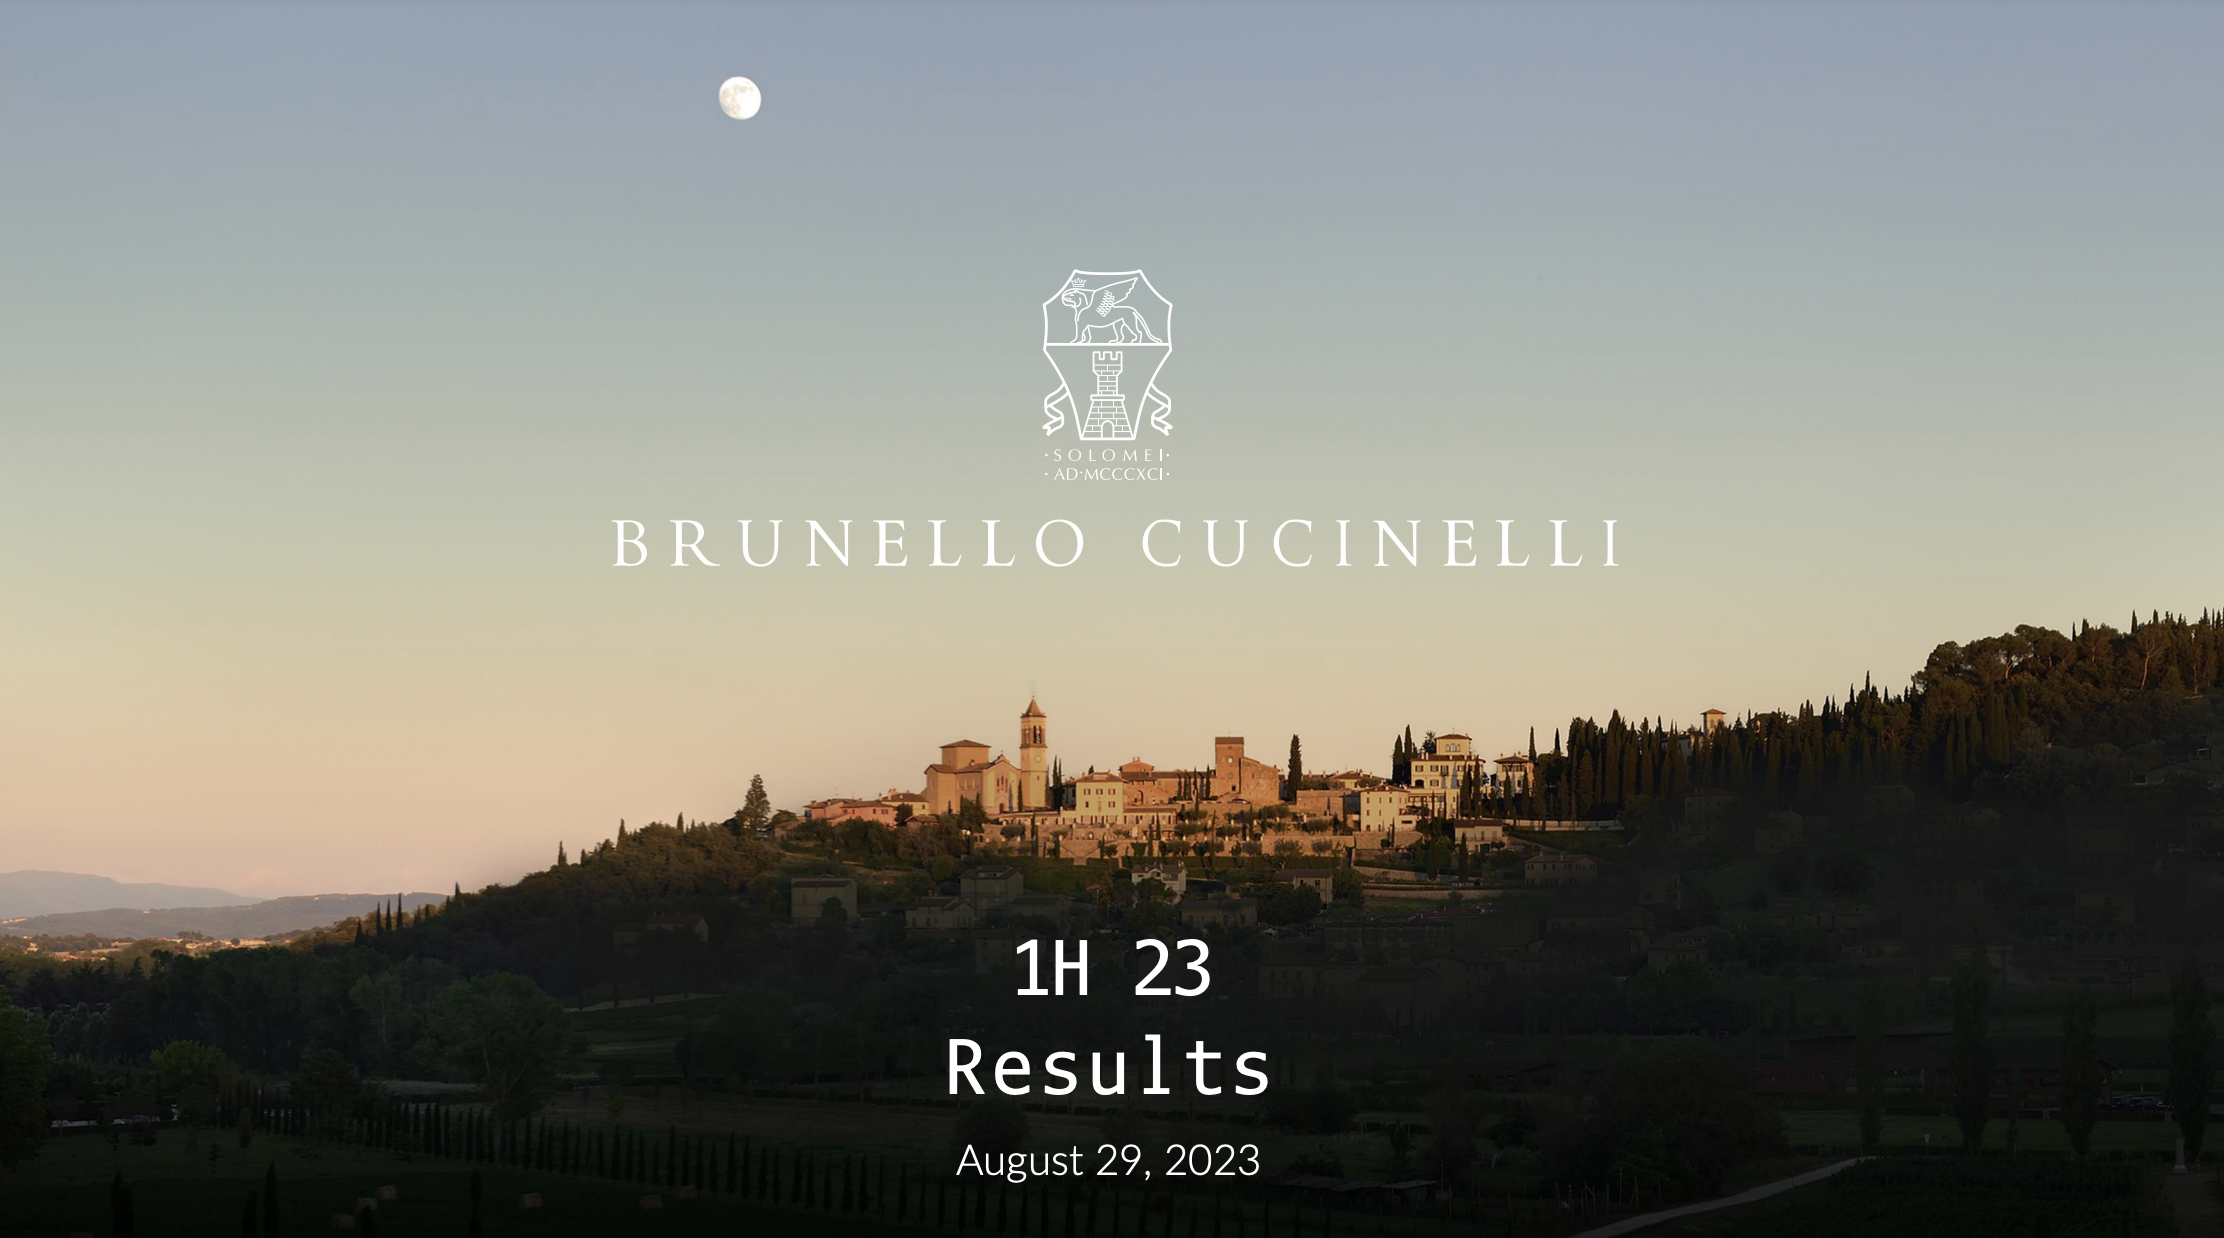 Brunello Cucinelli Releases Strong Semi-Annual Report: Profits Improve, Chinese Market Shows “Huge Growth Potential”